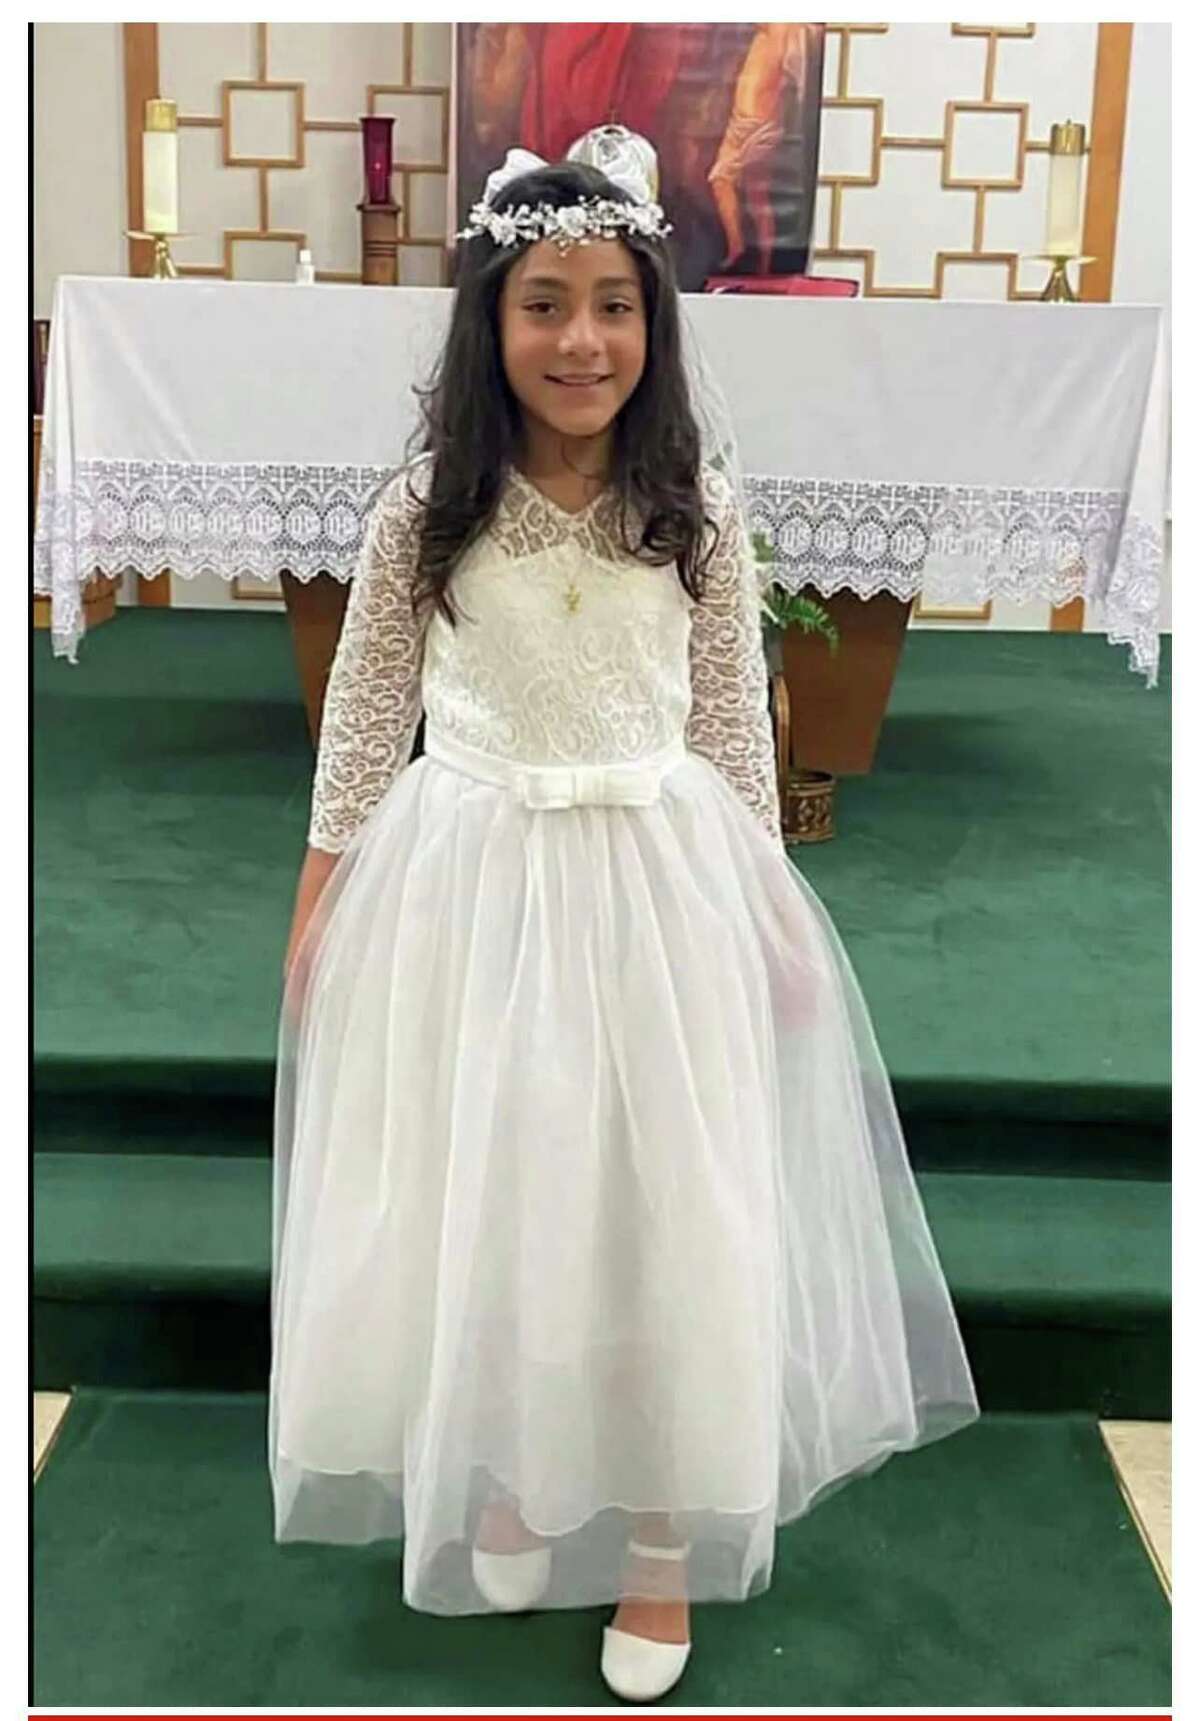 Jacklyn “Jackie” Cazares, 9, was killed in the mass shooting at Robb Elementary School in Uvalde. “I made a promise to her,” Javier Cazares said. “I am going to stay and fight” for gun control.